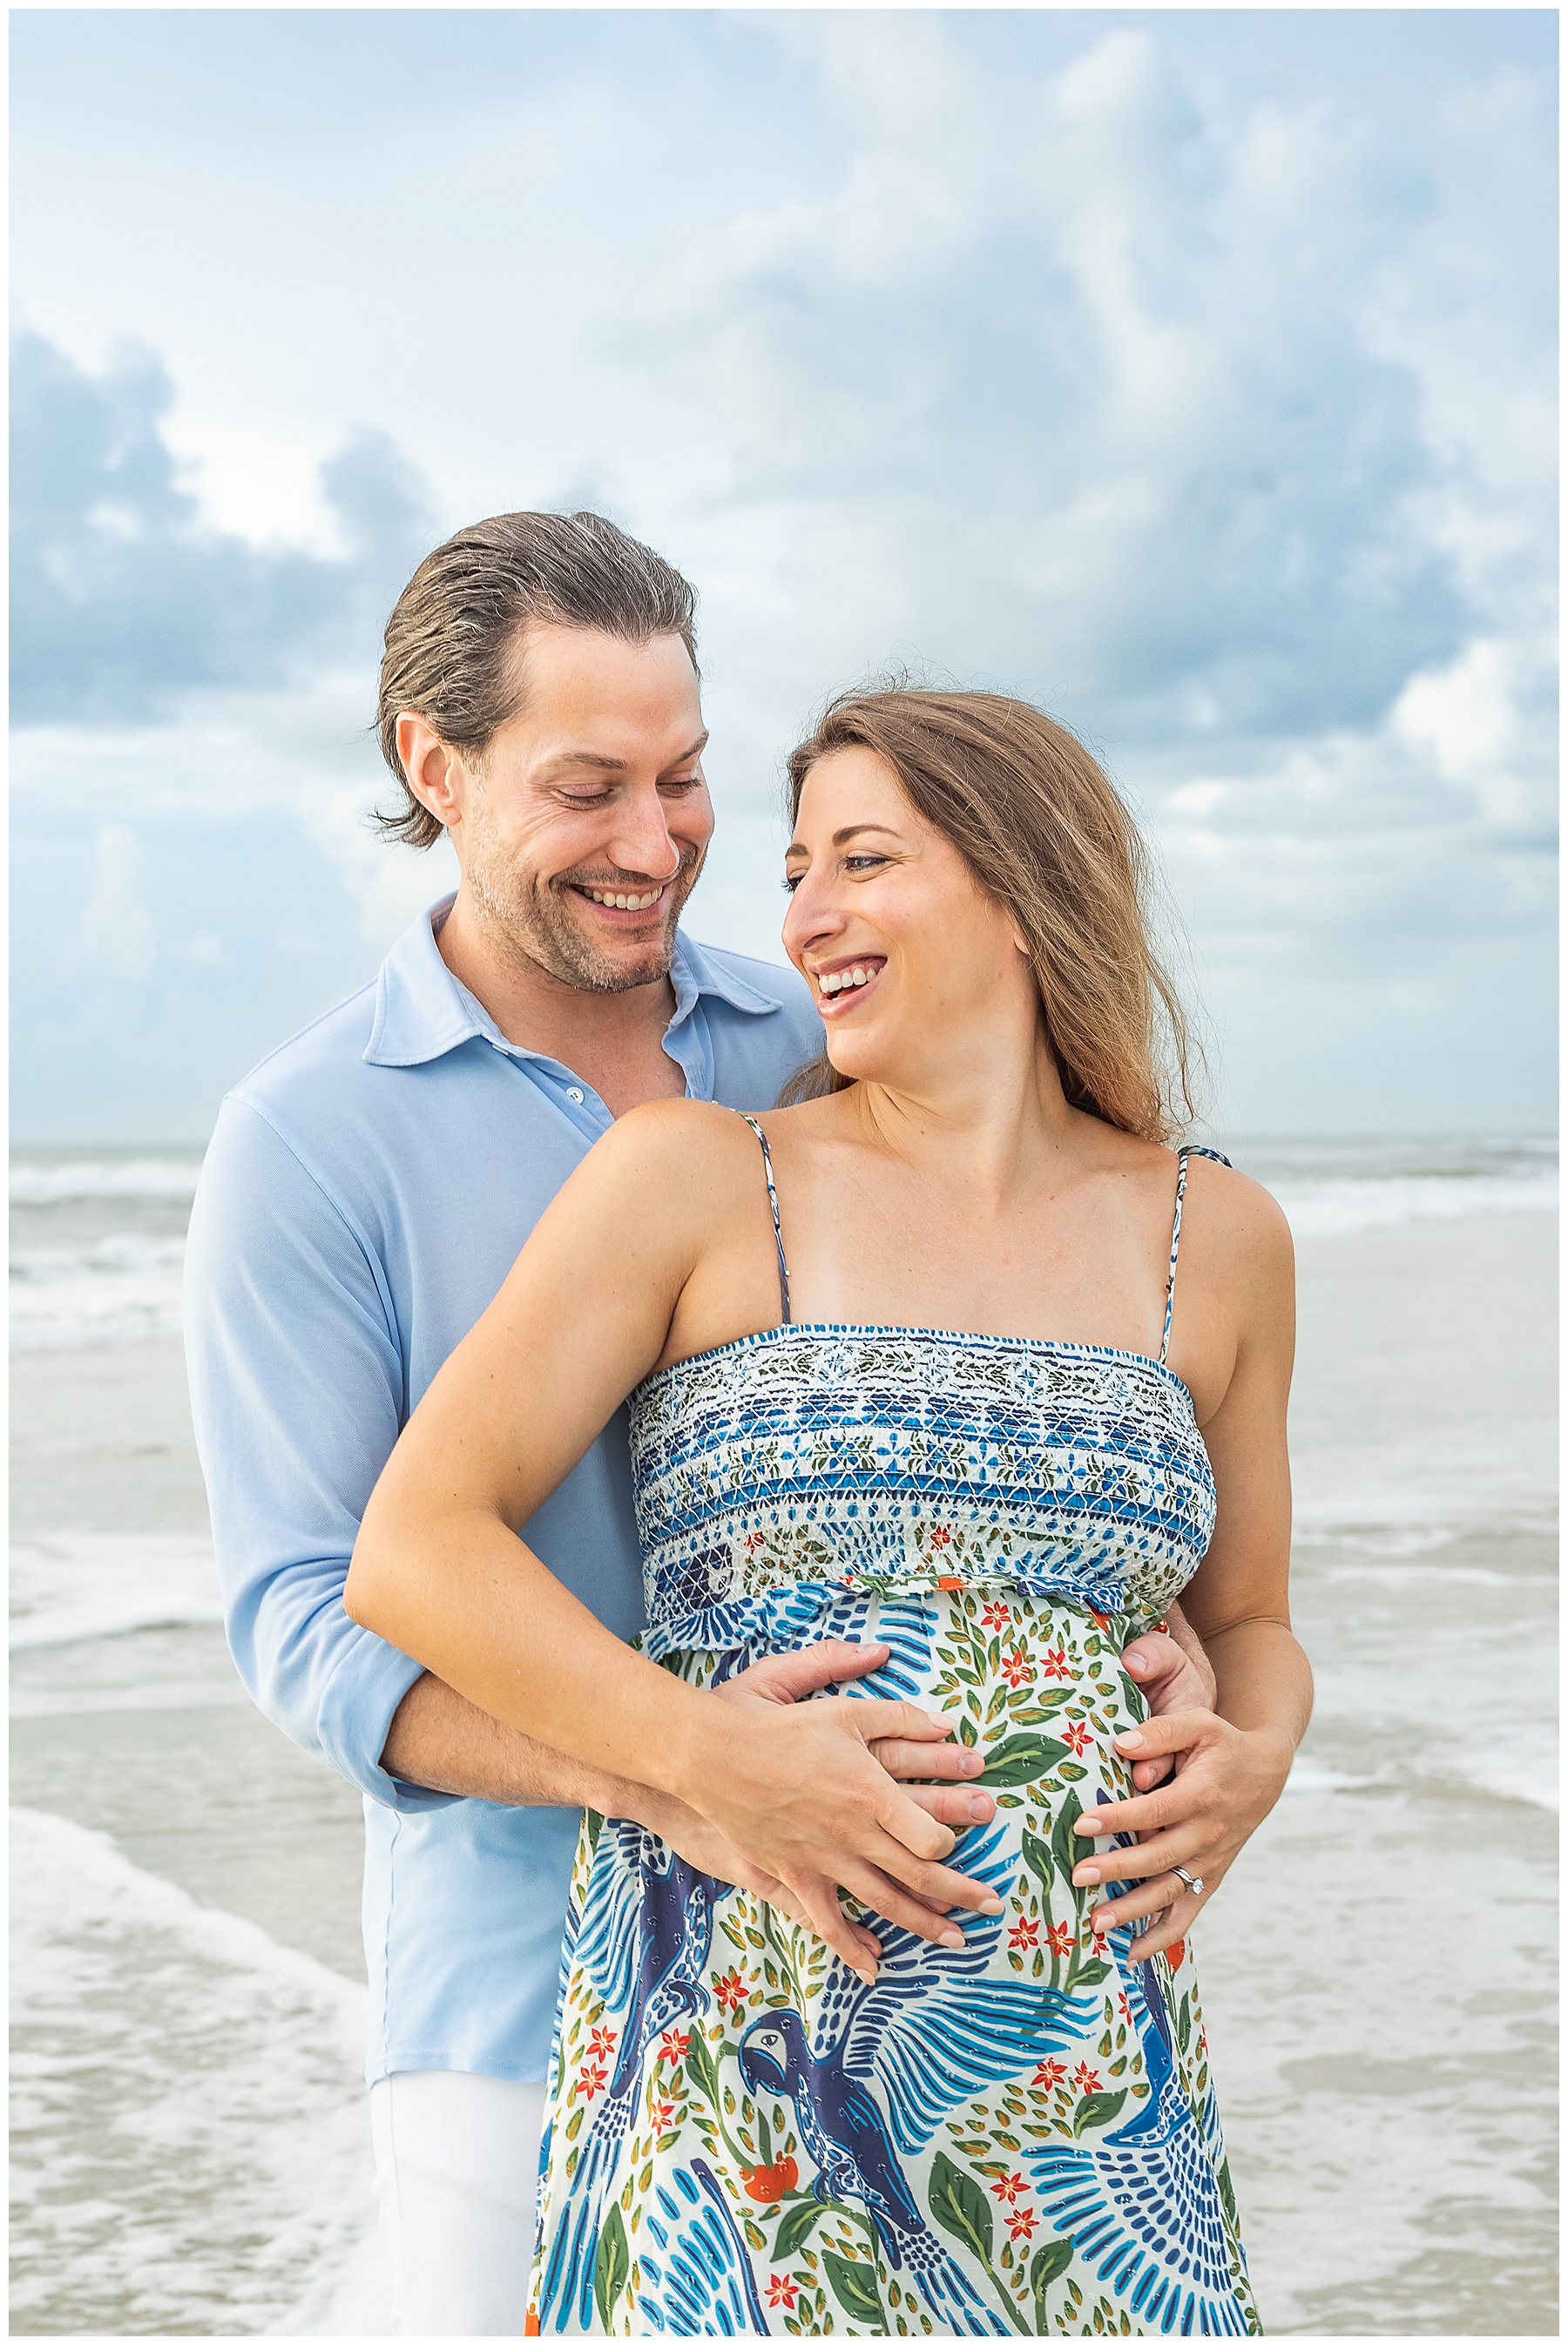 man and pregnant woman holding each other on the beach during an airy sunrise in st. augustine beach florida